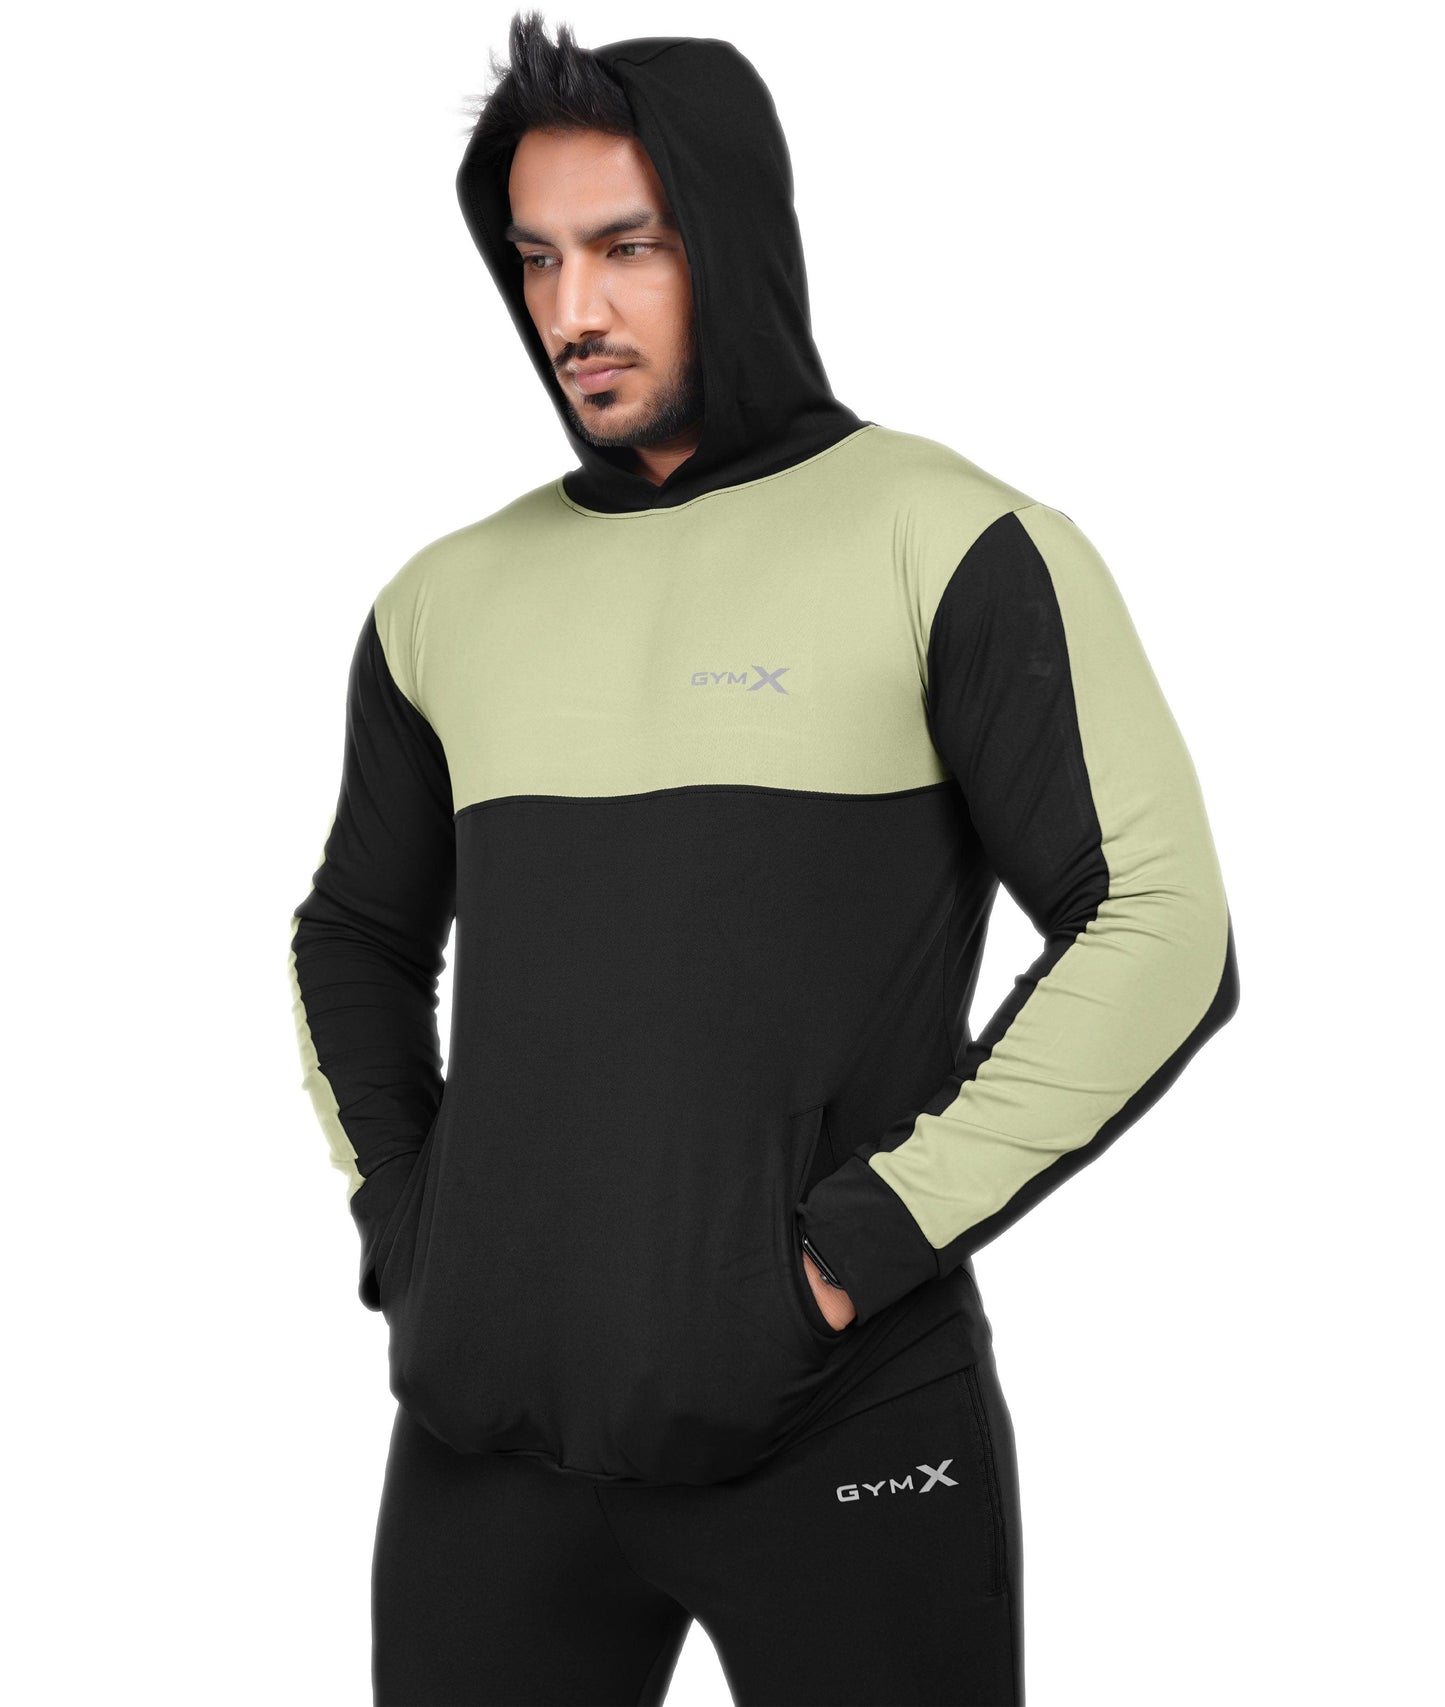 Dual Edition GymX Pullover: Pista Green- SALE